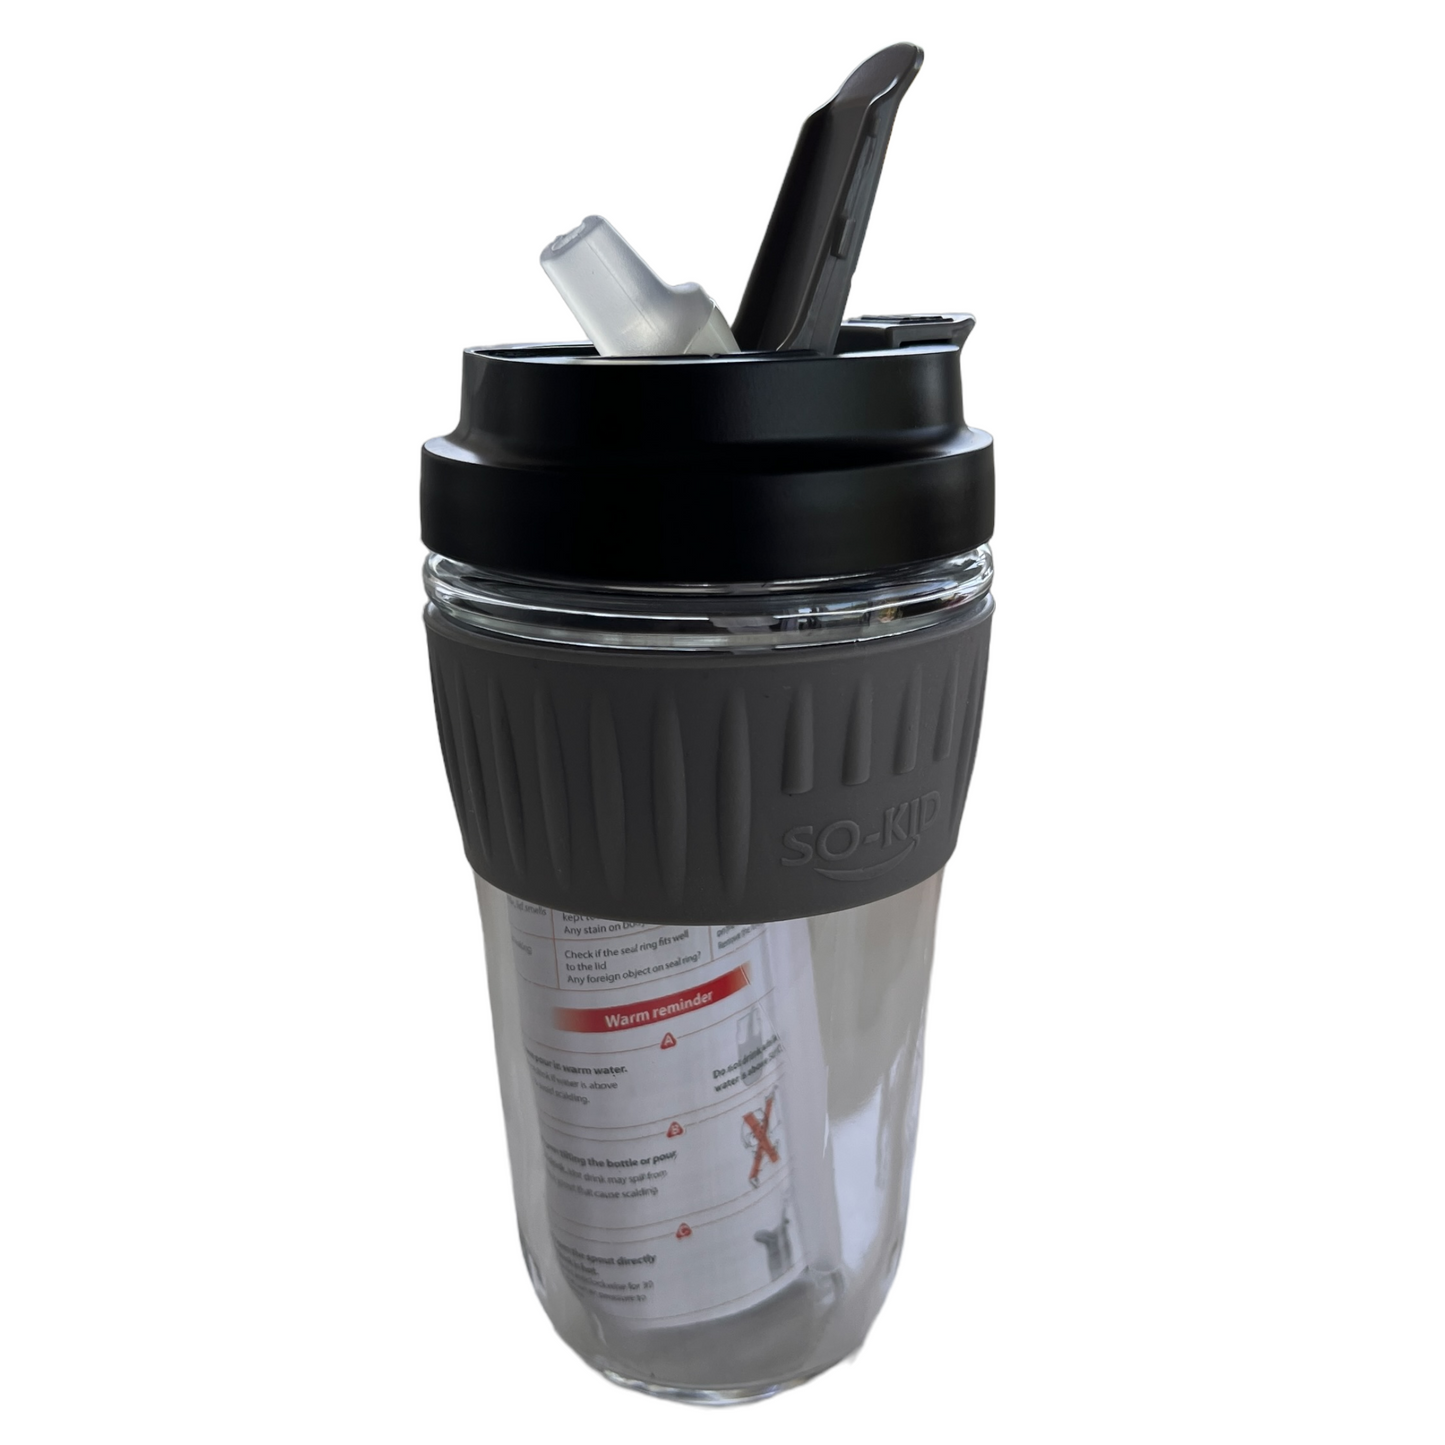 Heavy duty glass mug with lid and built in straw Mobility & Accessibility SPIRIT SPARKPLUGS   